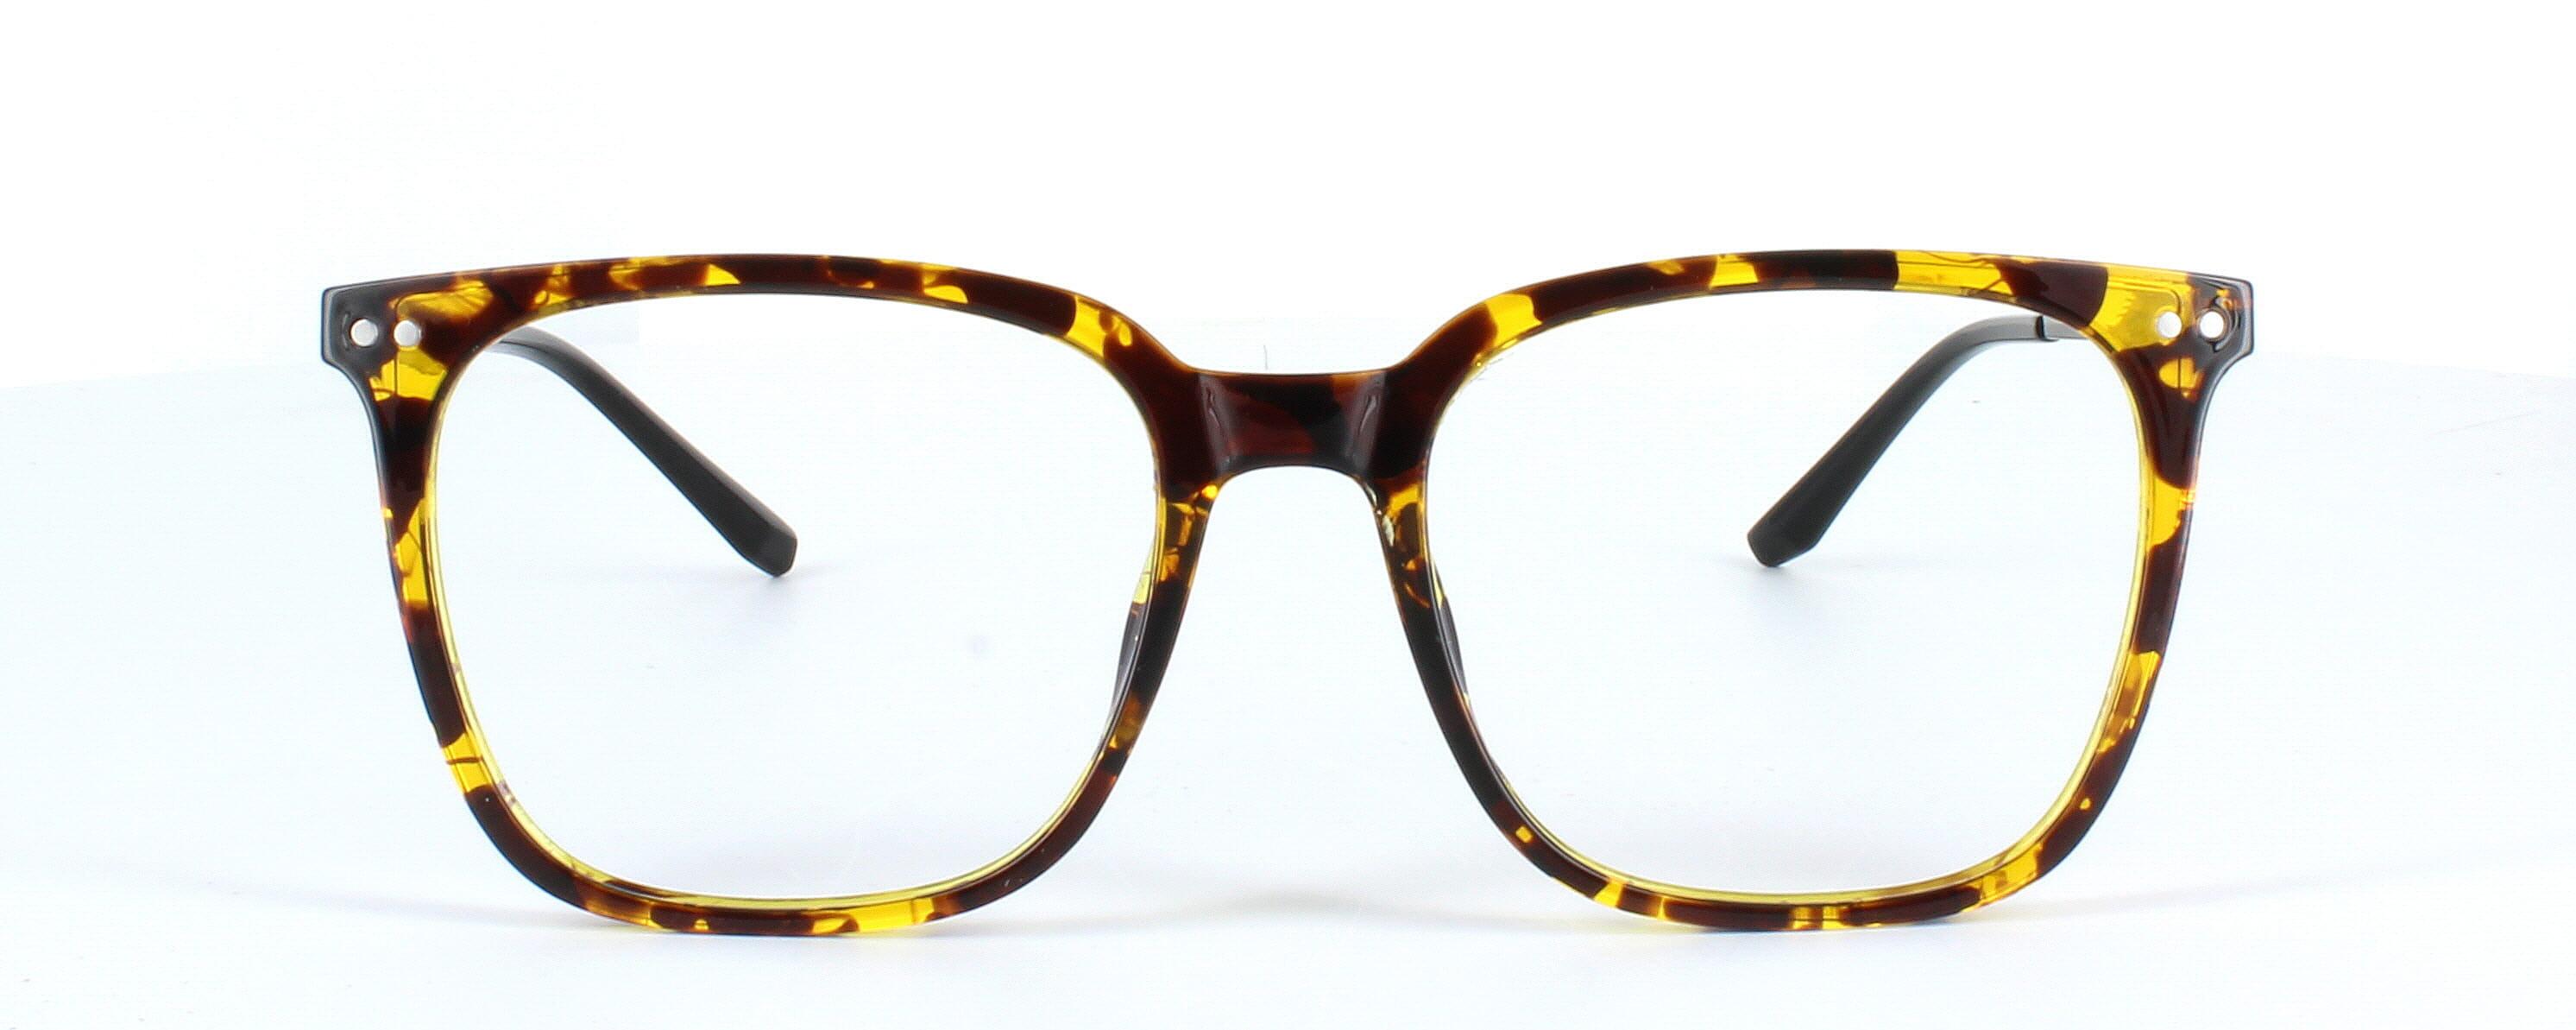 Edward Scotts ST6202 - Tortoise - Gent's acetate frame with square shaped lenses with silver titanium arms - image view 2